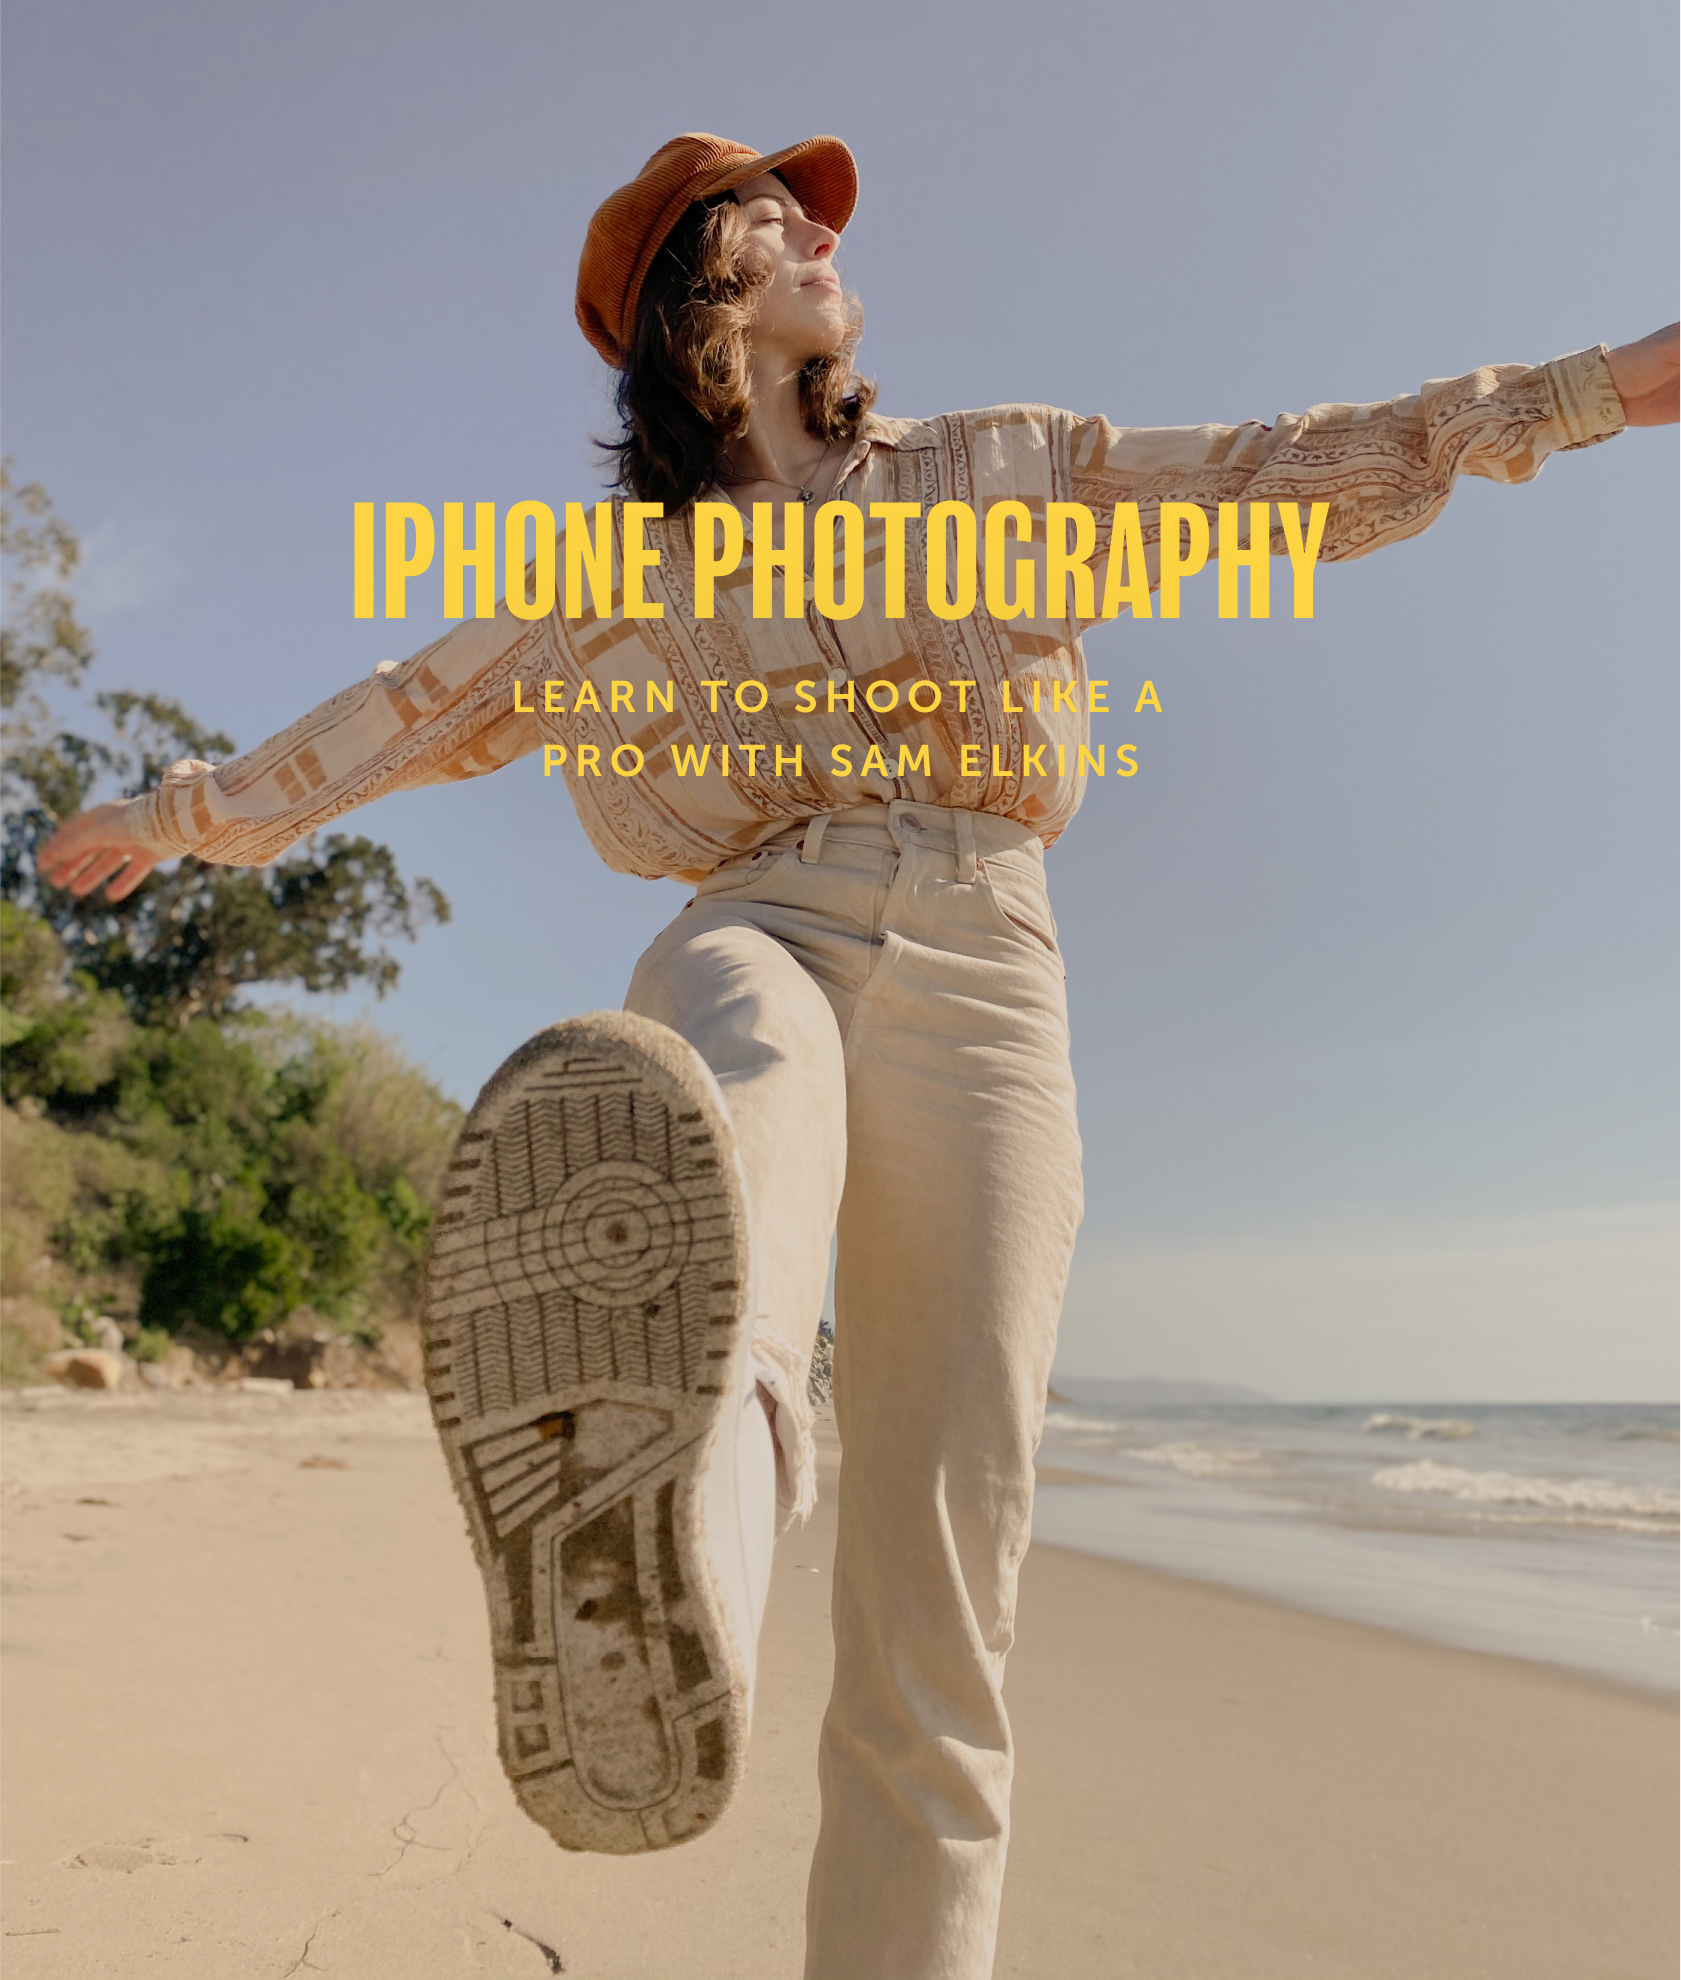 Moment iPhone Photography: Learn to Shoot like a Pro with Sam Elkins - Learn Photography Online